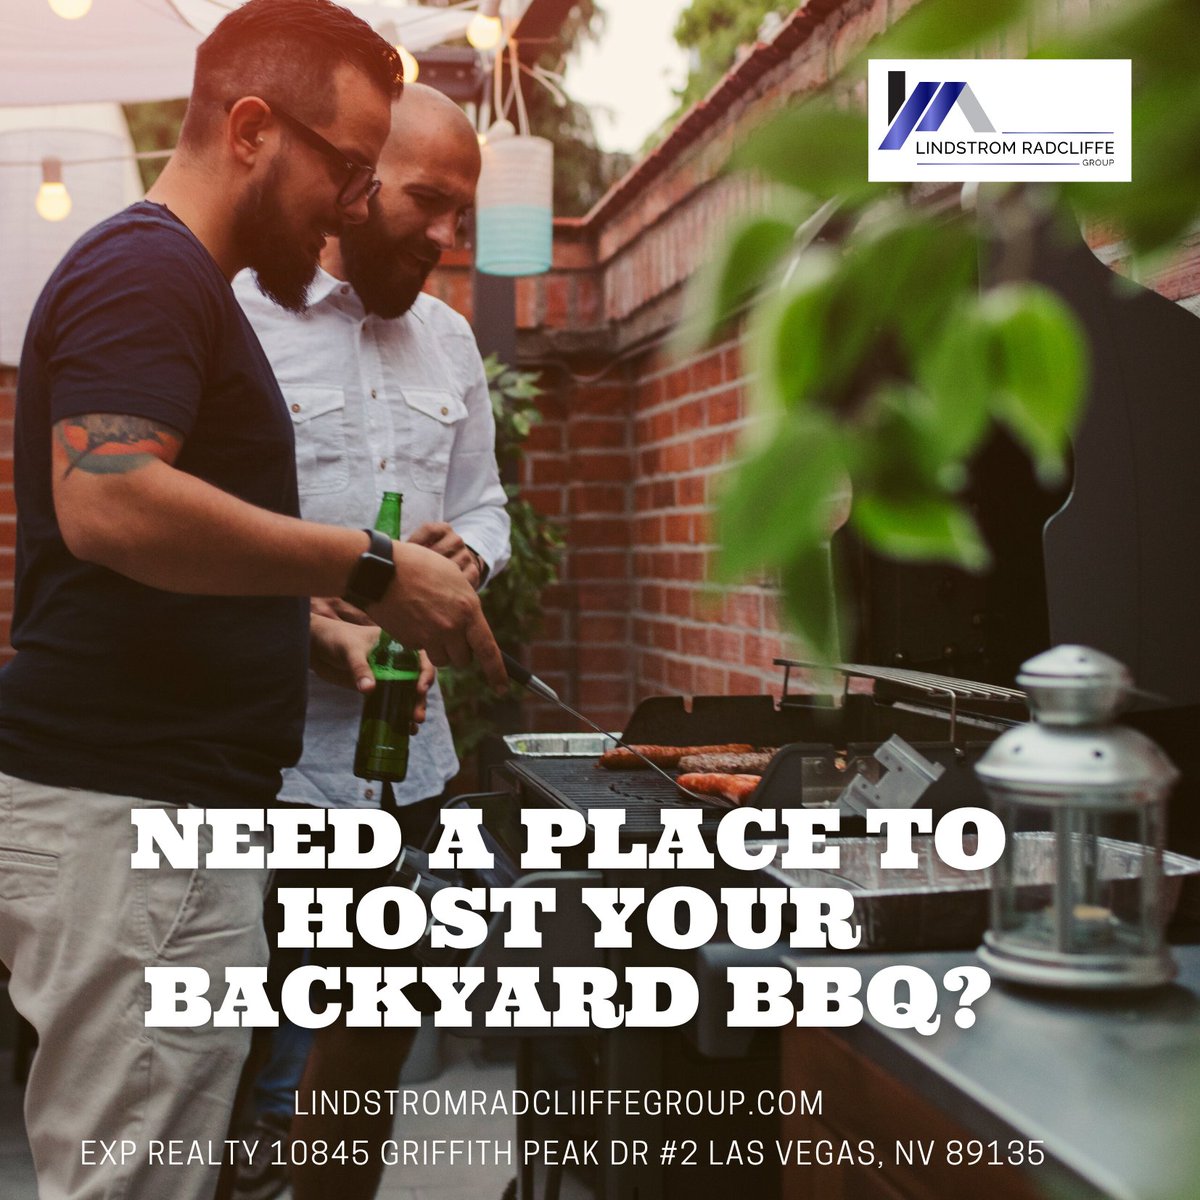 Need that special place to host your backyard BBQ?LindstromRadcliffeGroup.com
Let us be the ones to help make your real estate goals come true! Contact me today!
#LindstromRadcliffeGroup #LasVegasARealtor #HendersonRealtor #ExpRealty #BuyAndSellWithUs #Realtor #RealEstateGoals